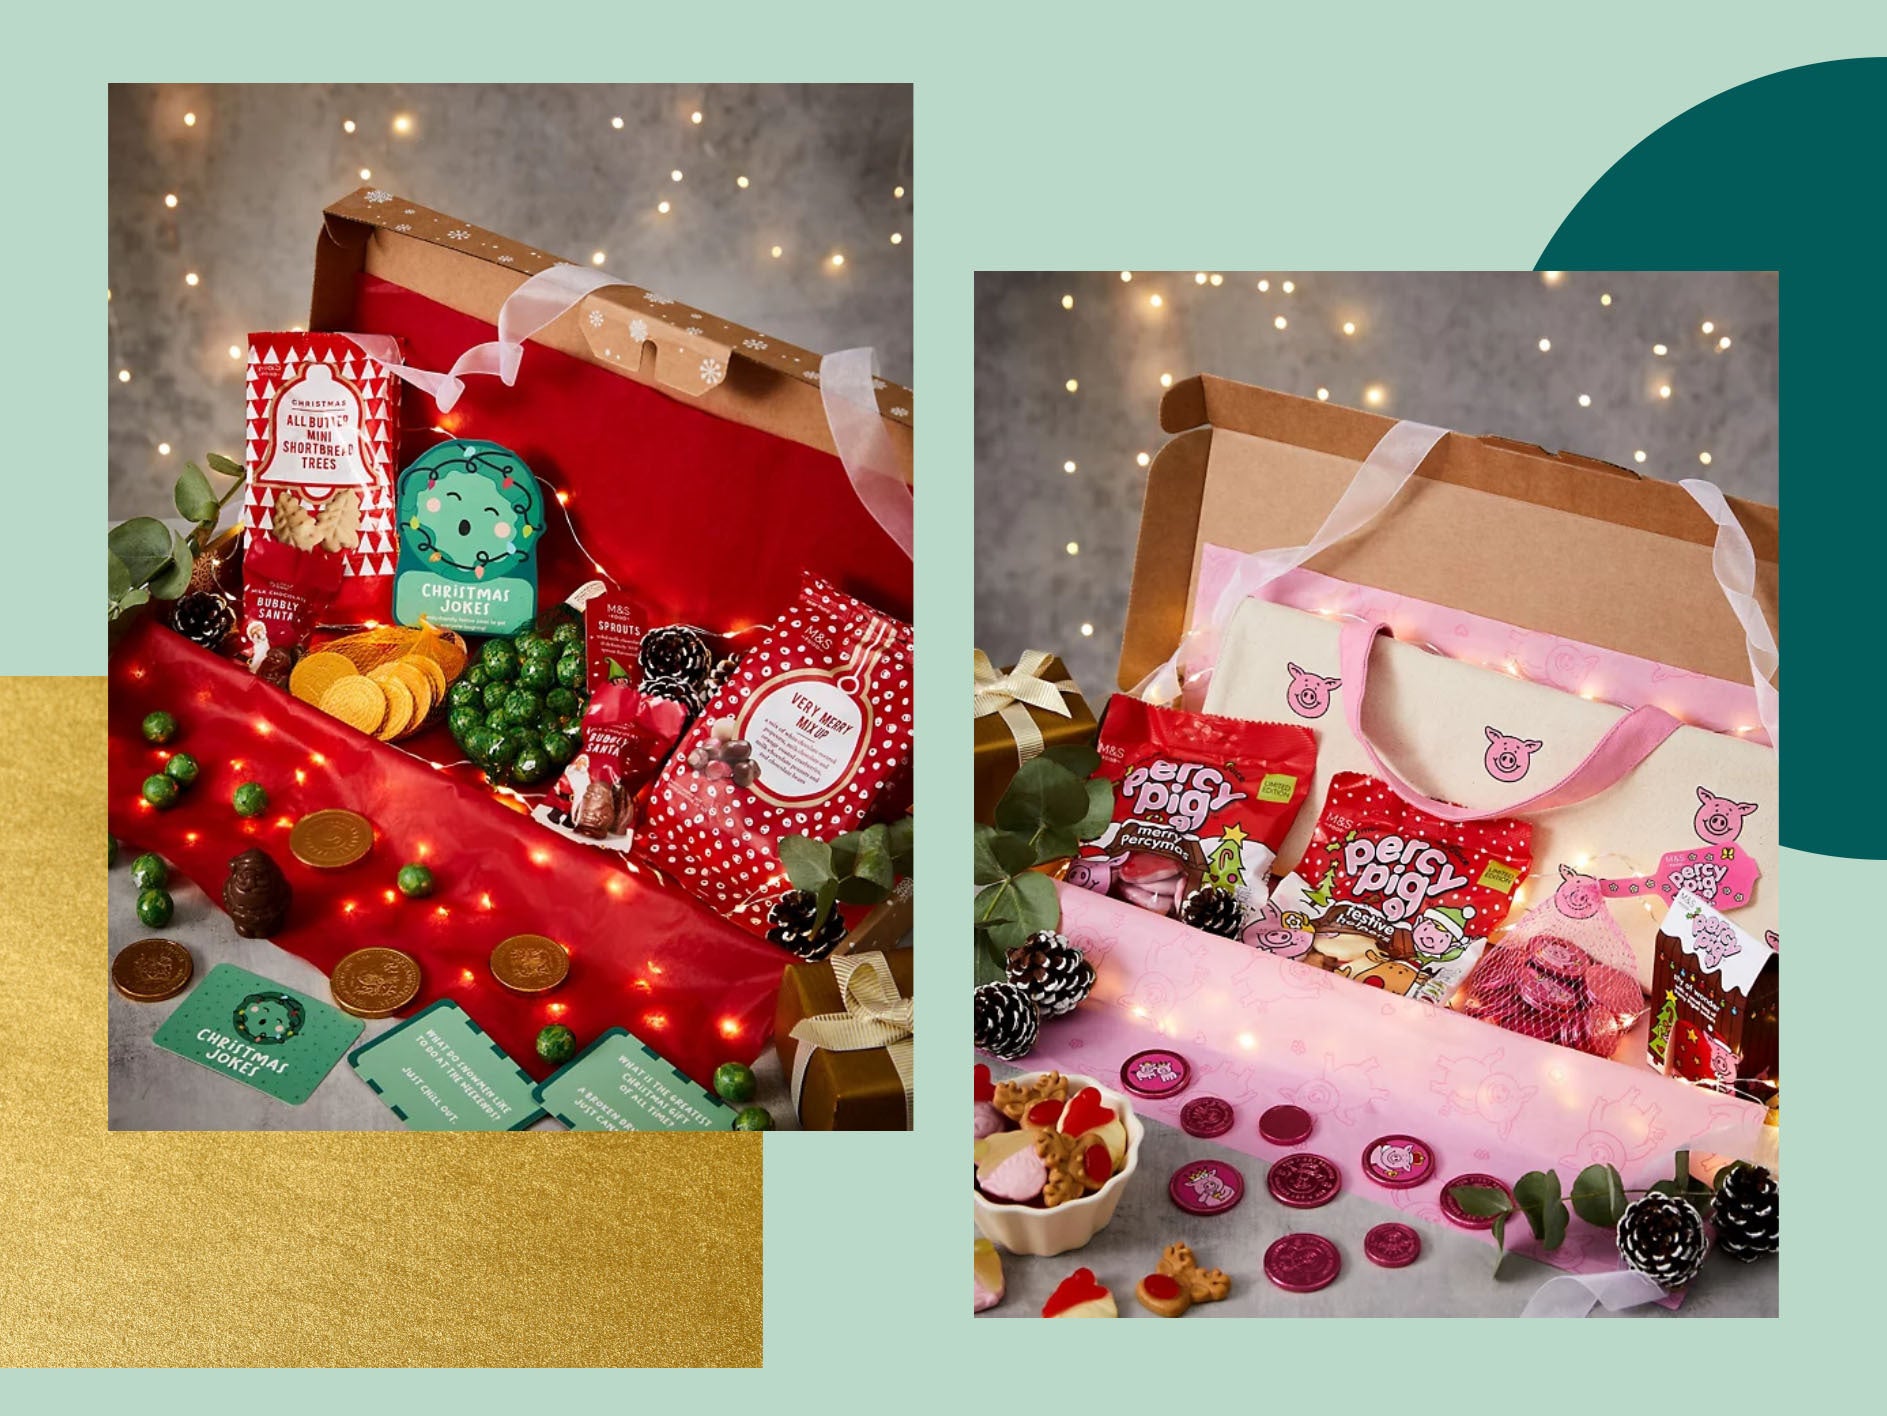 From shortbread trees and chocolate coins to caterpillar fruit gums and candy-cane sweets, there’s plenty to tuck into